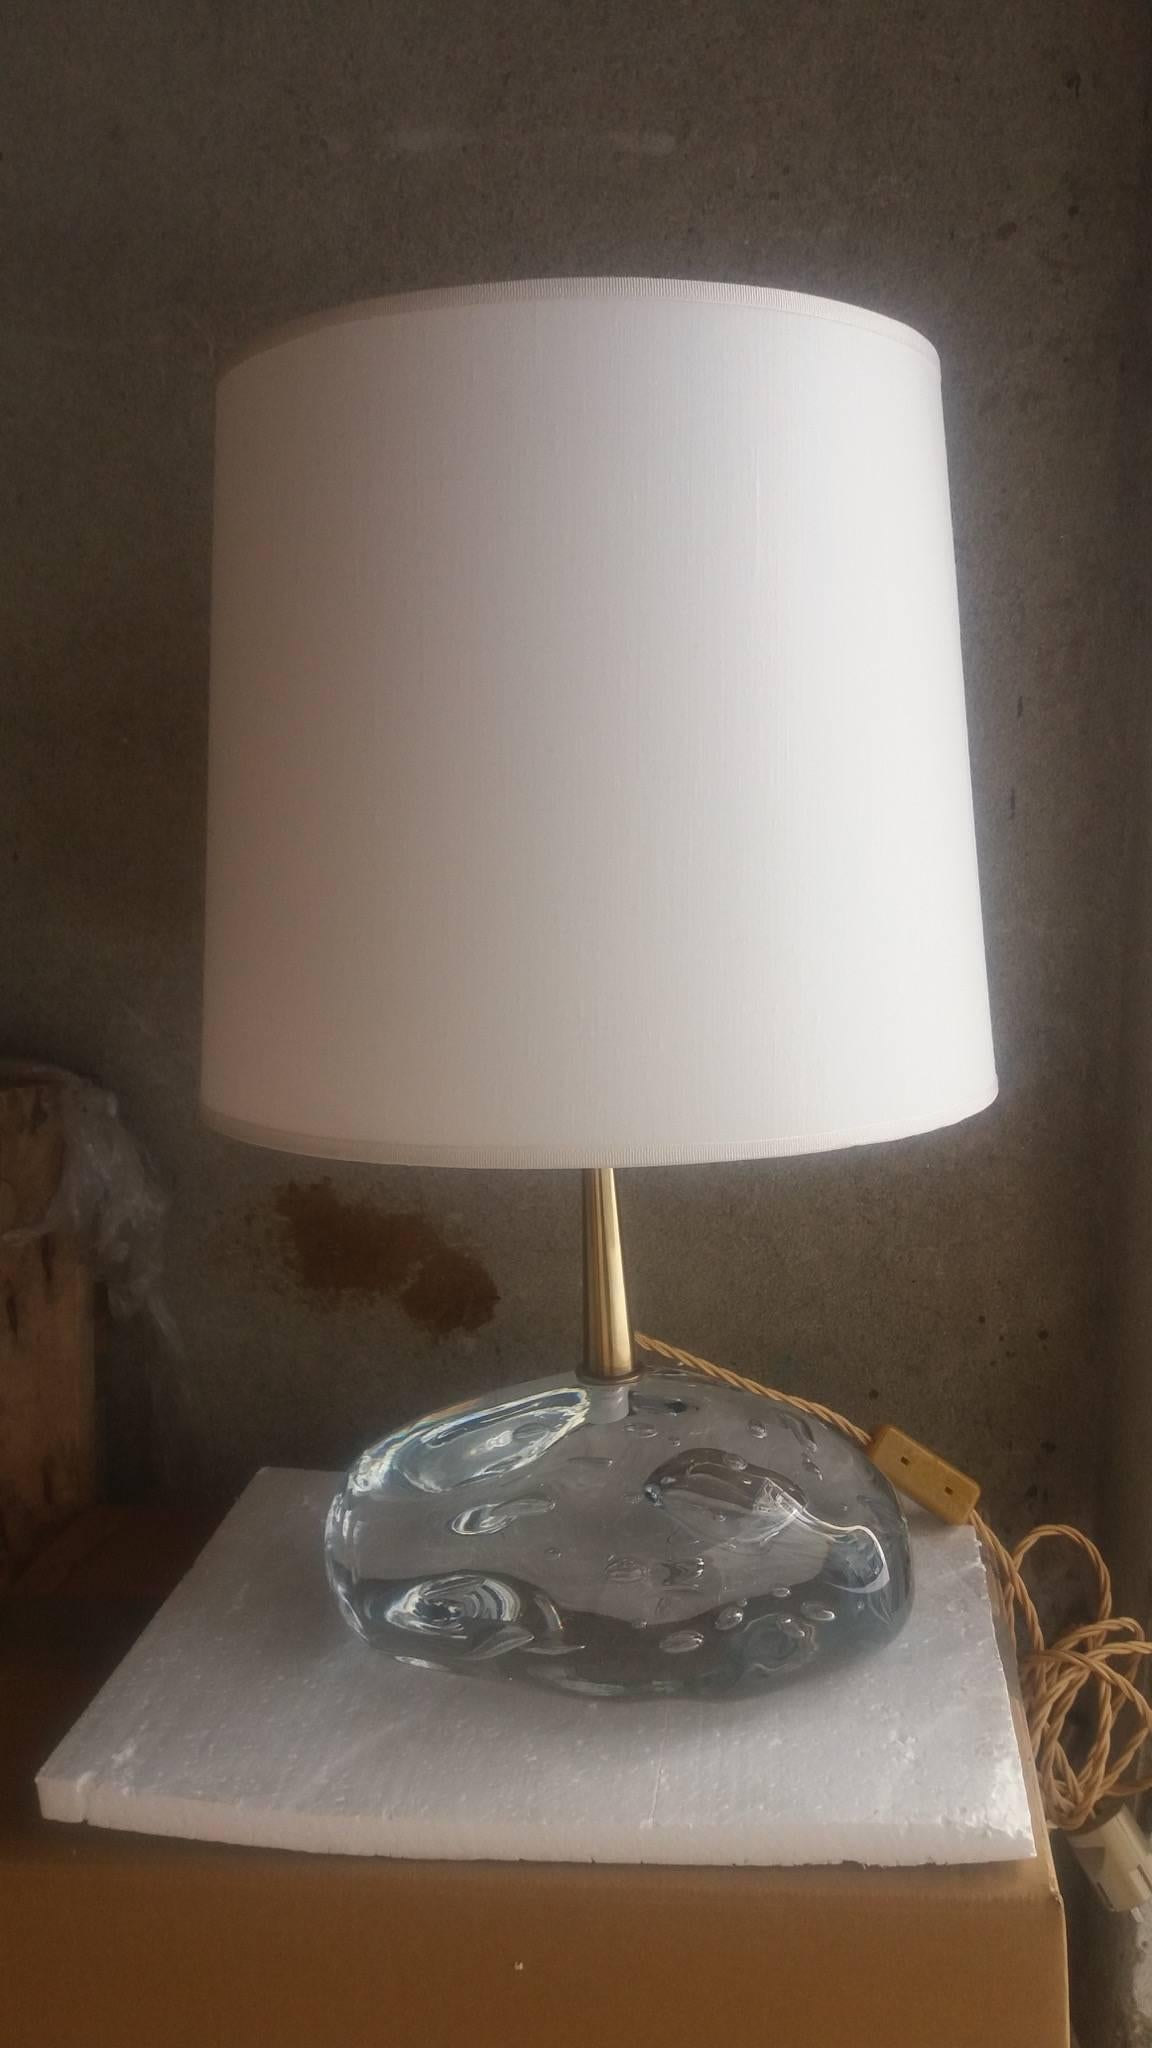 2017 Pair of Table Lamps In Excellent Condition For Sale In -, Cote d'Azur